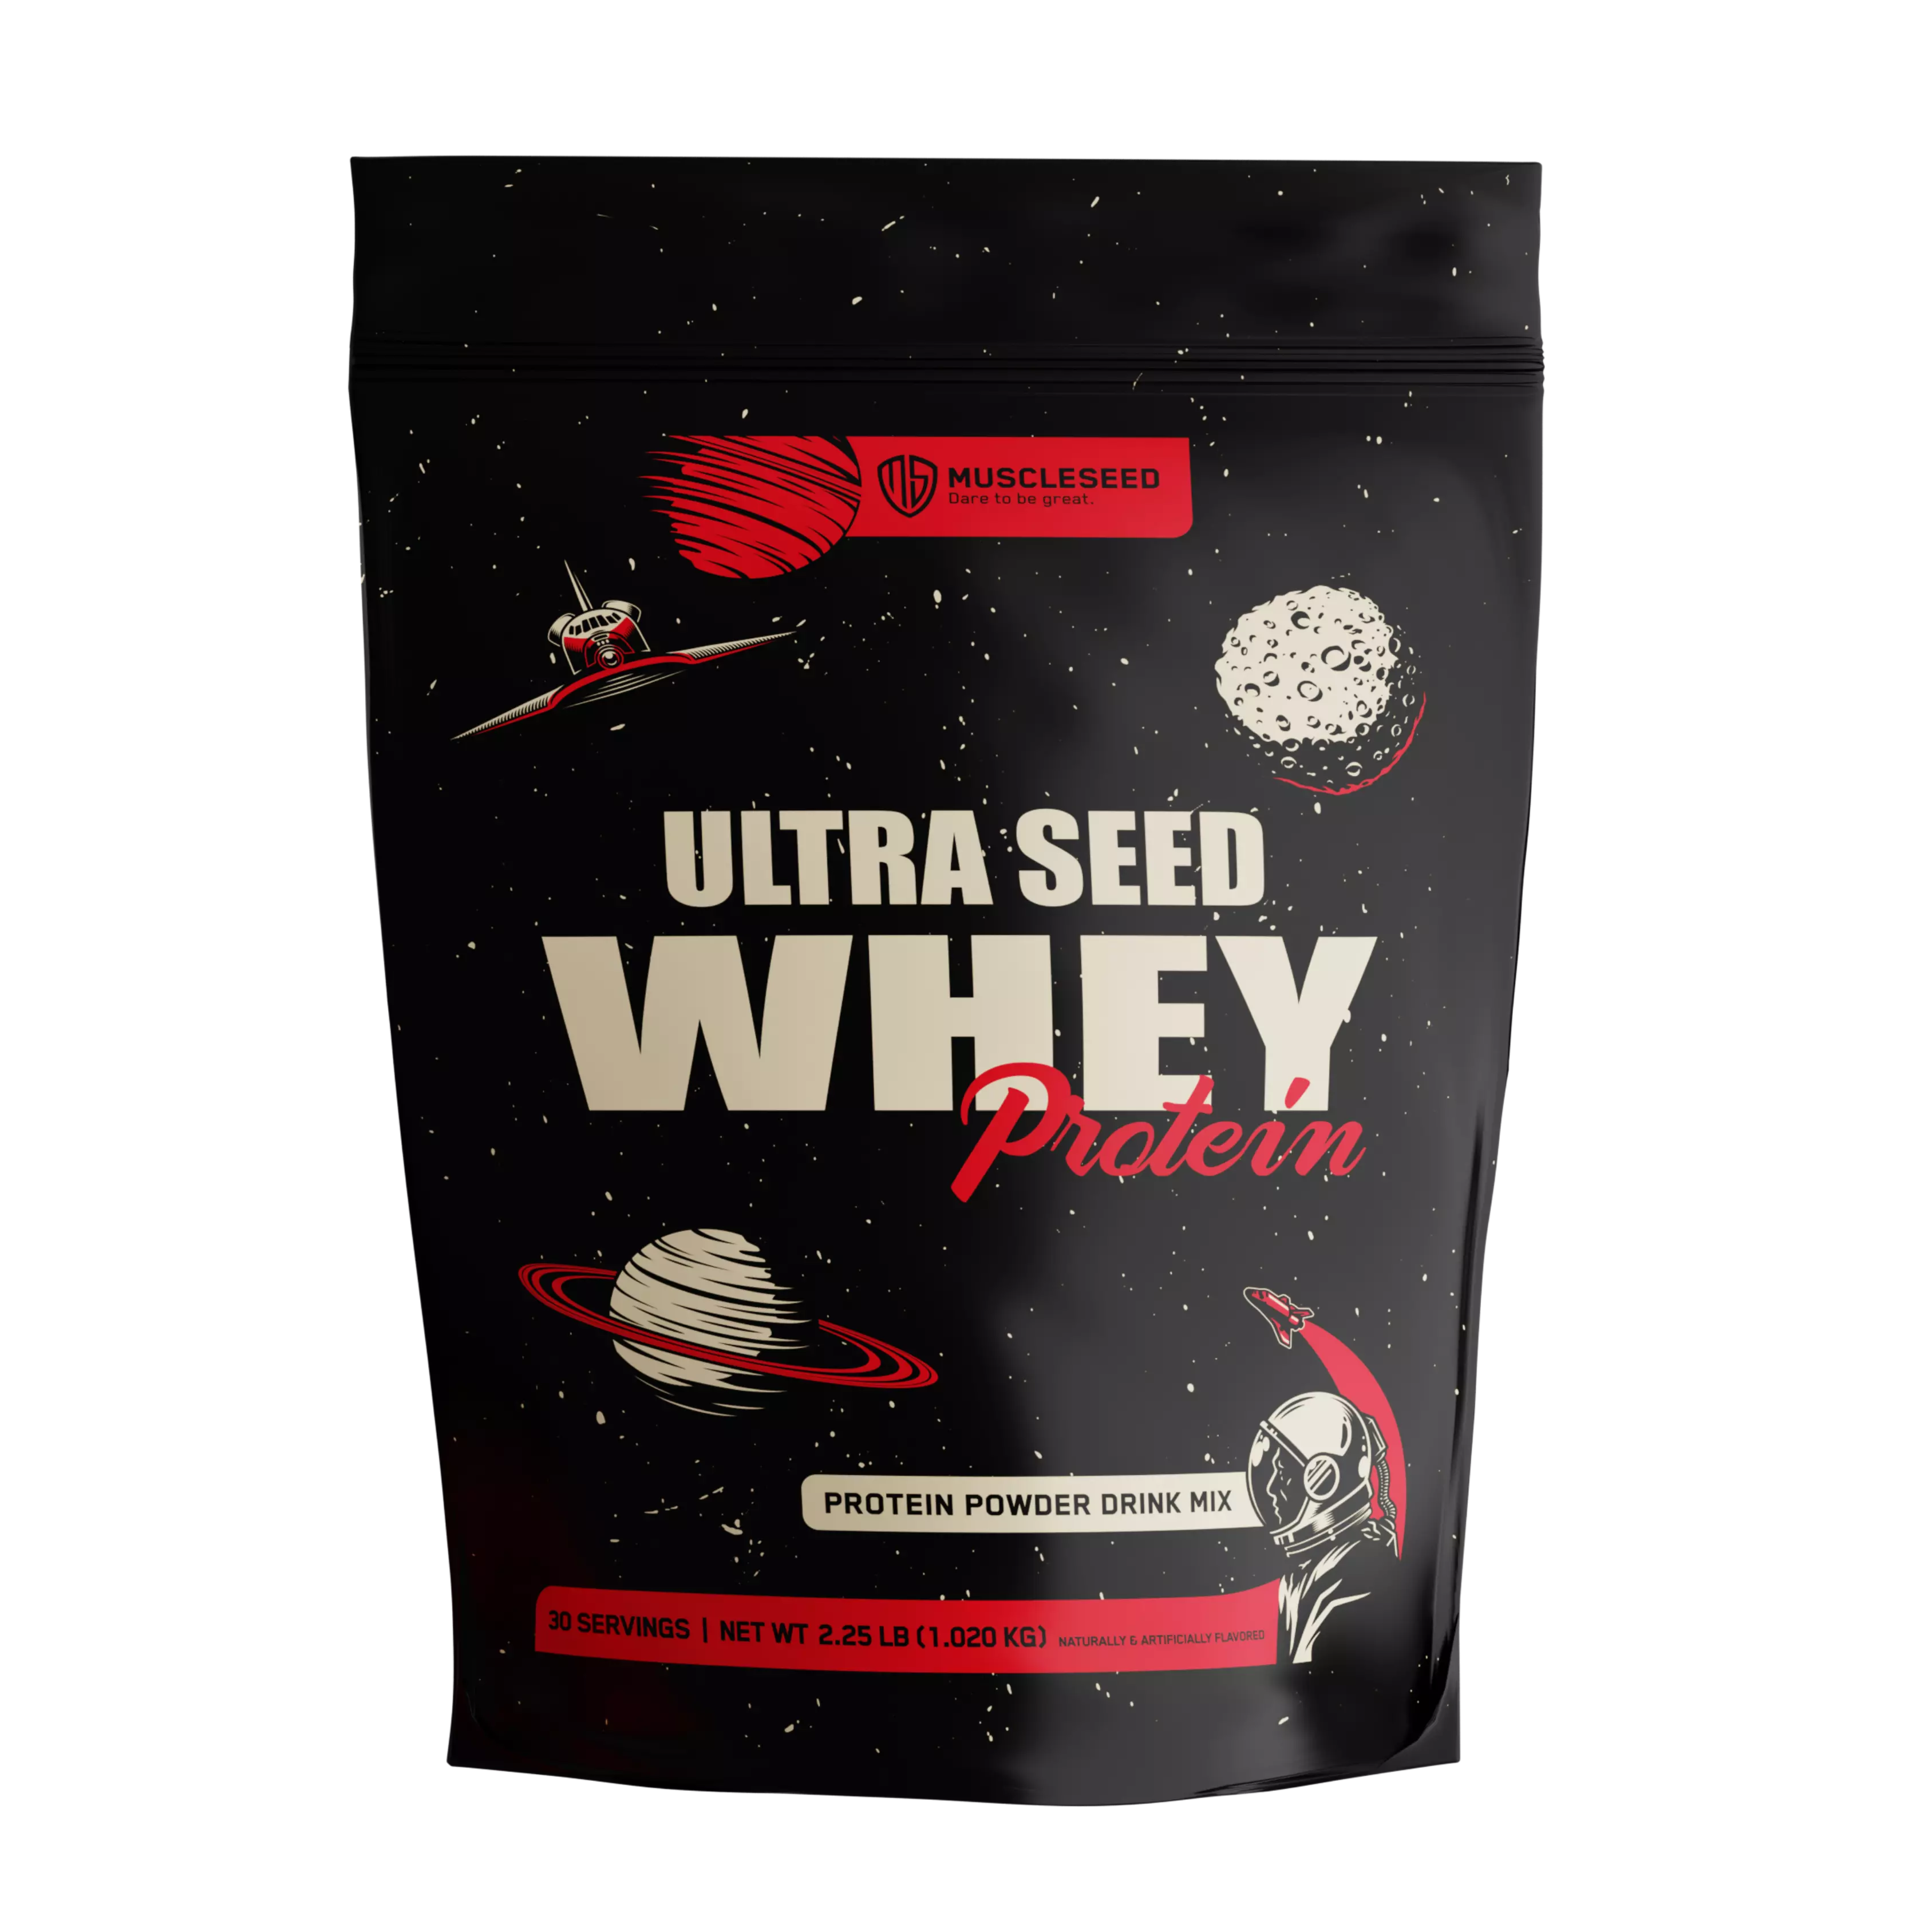 <h3><strong><span style="color: #000000ff">ULTRA SEED WHEY PROTEIN 1 KG</span></strong></h3>